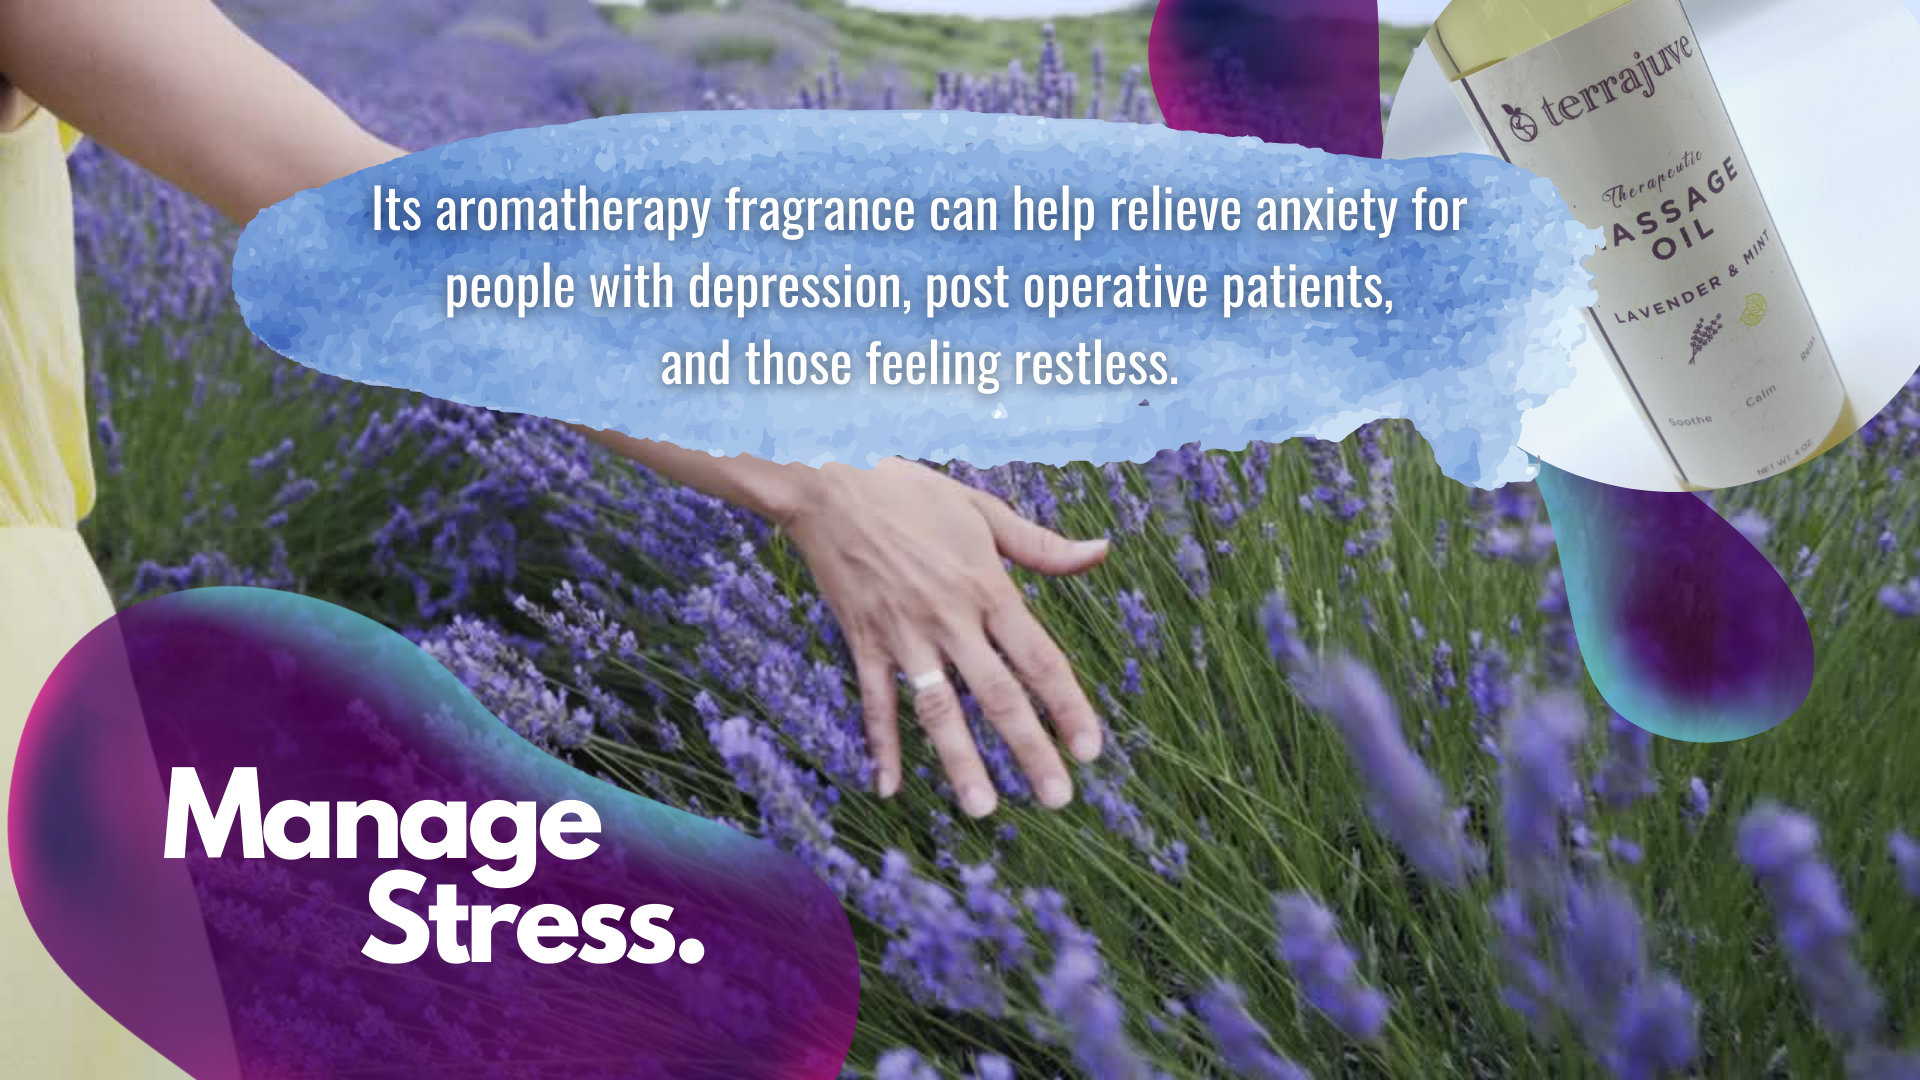 Lavender and Mint Therapeutic Massage Oil